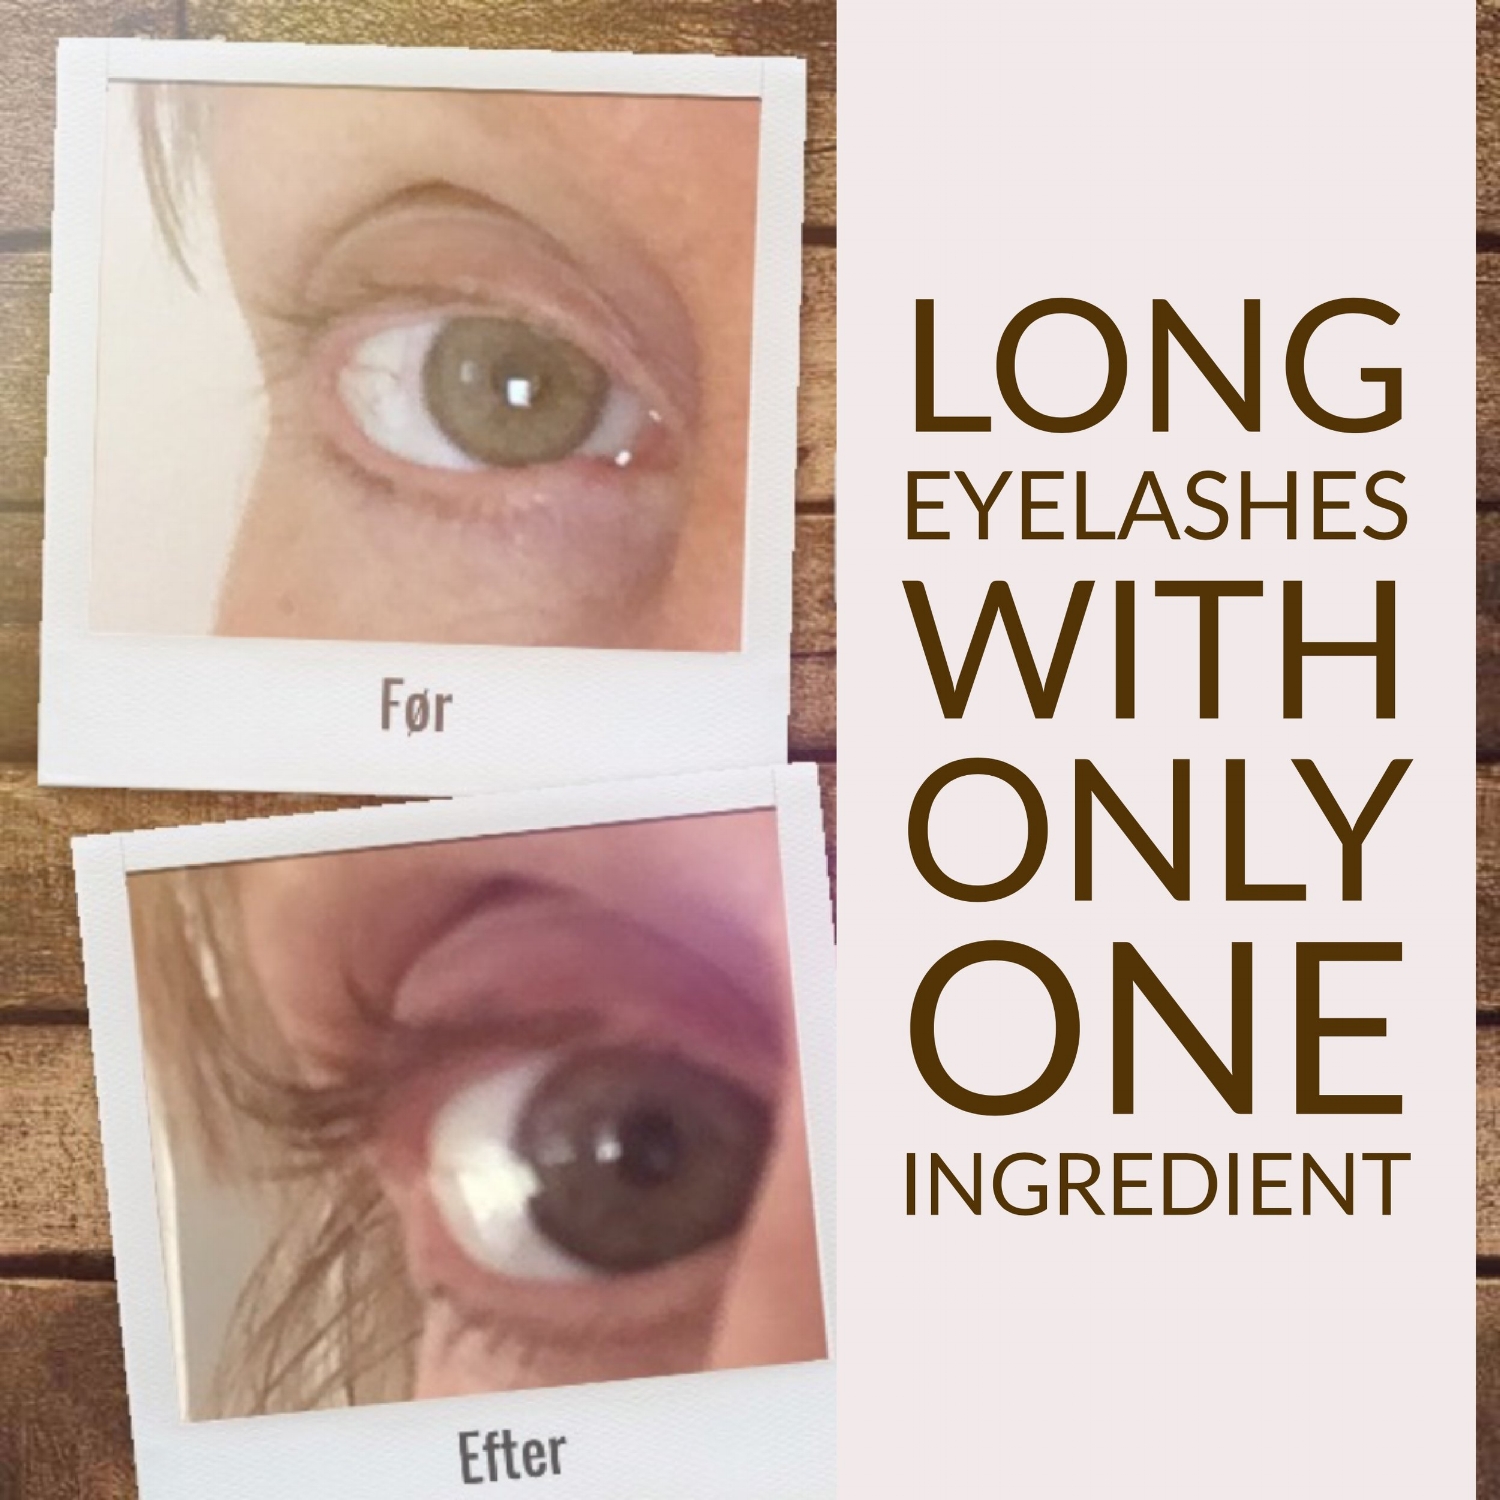 How To Naturally Increase The Amount Of Eyelashes With One Remedy Hanne Robinson The Best Danish Health Blog In English